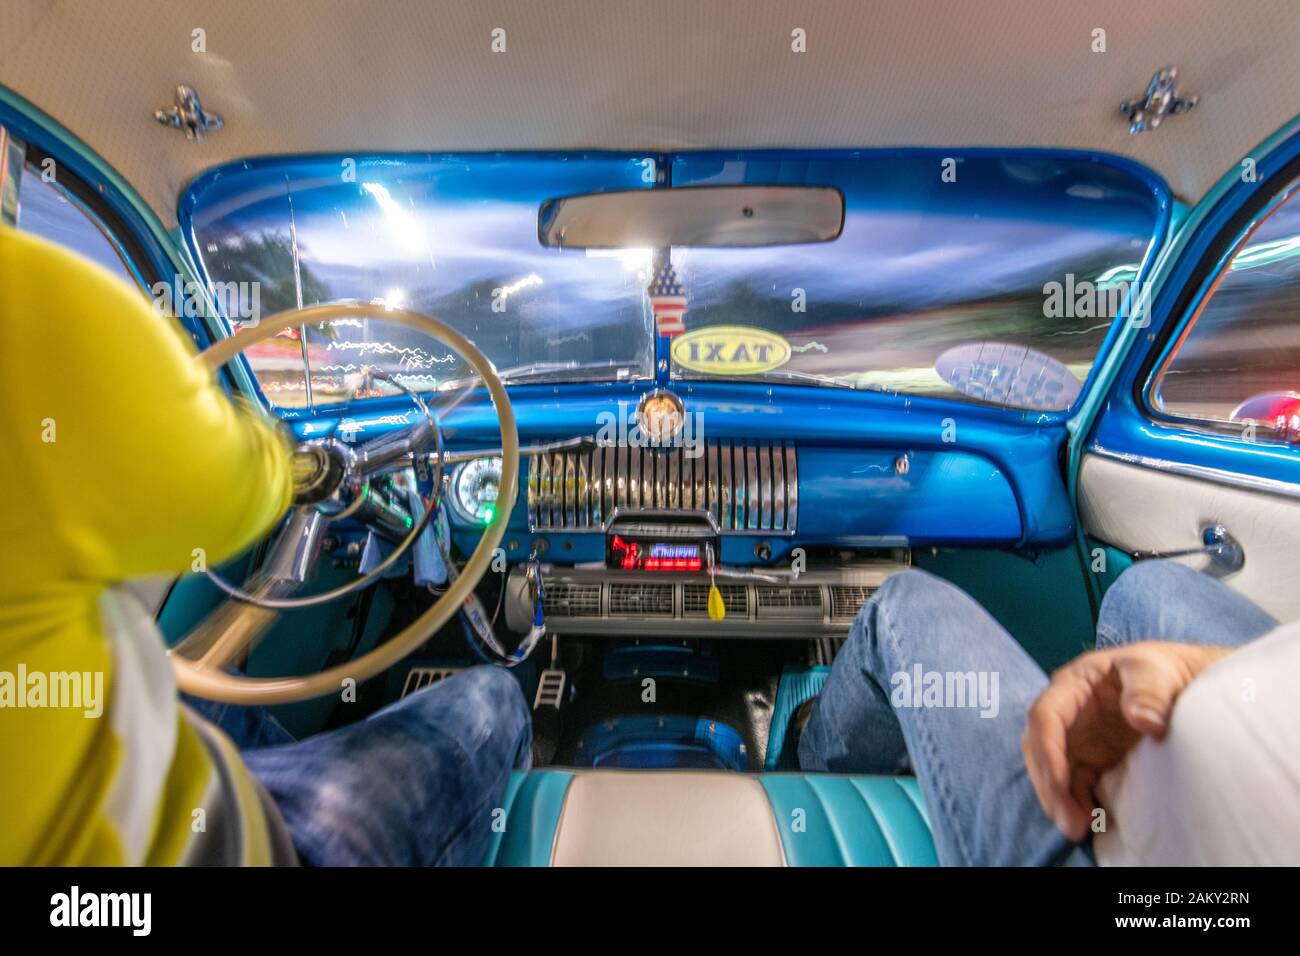 Beautifully finished interior of a classic American muscle car from the 1950s , Havana, Cuba Stock Photo